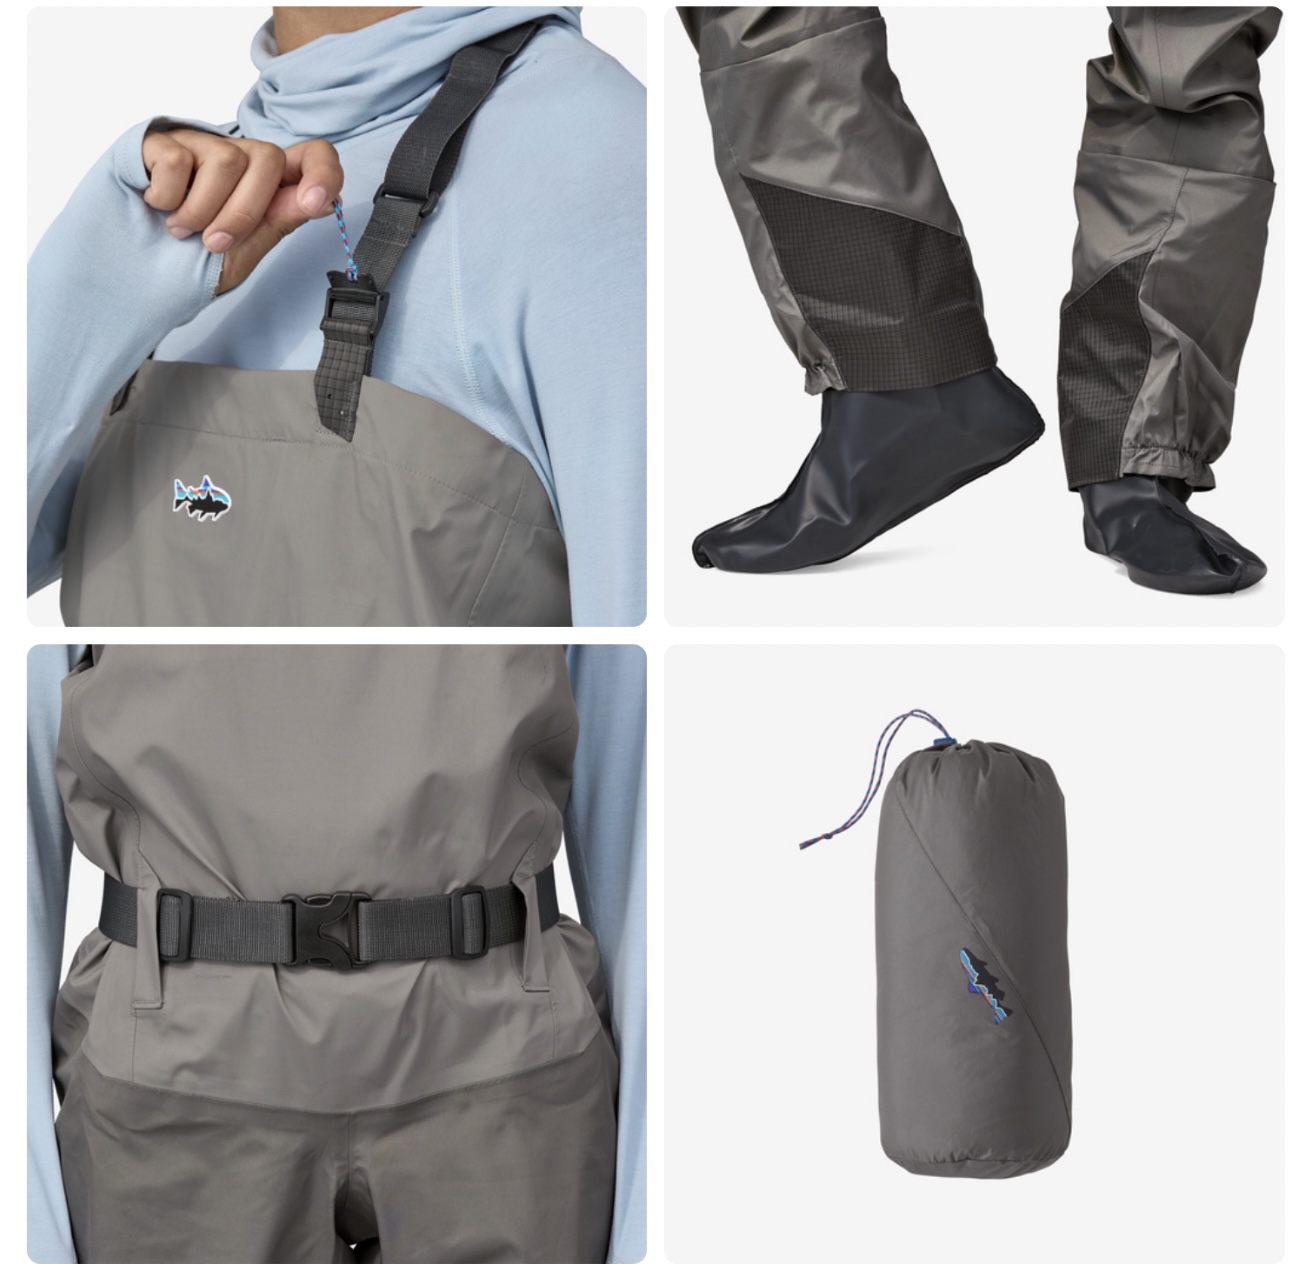 Patagonia Swiftcurrent Ultralight Wader Review - Moldy Chum